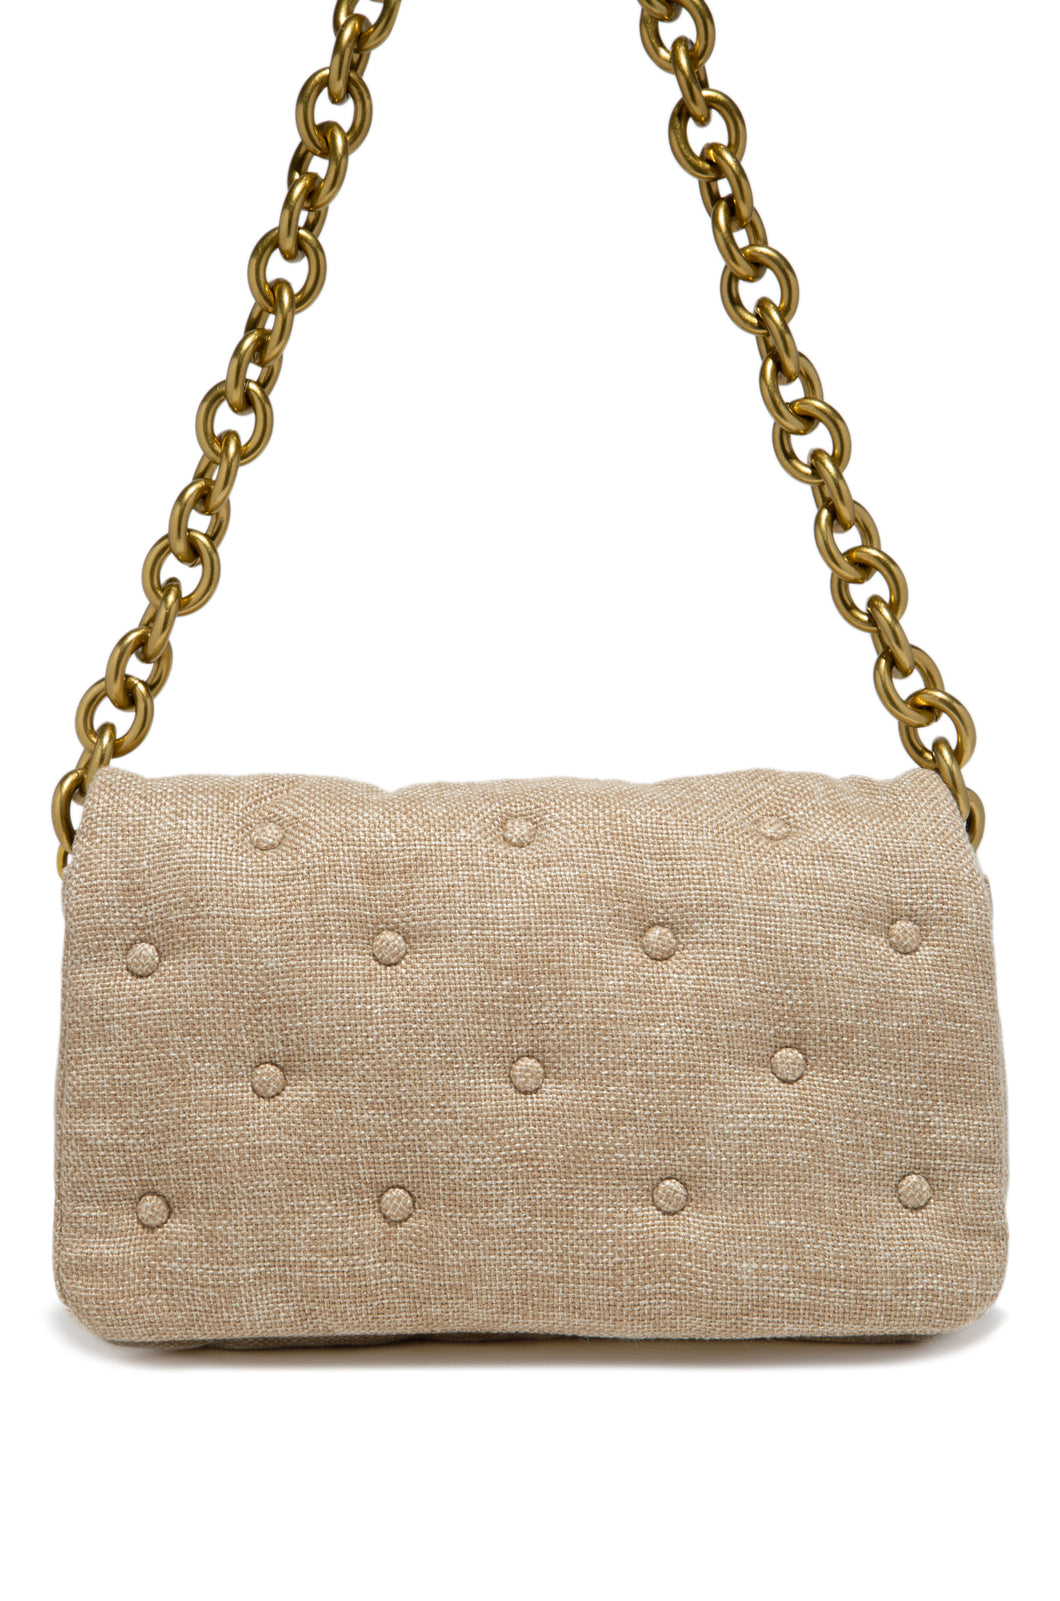 Nude Tweed Bag with Gold-Tone Chain